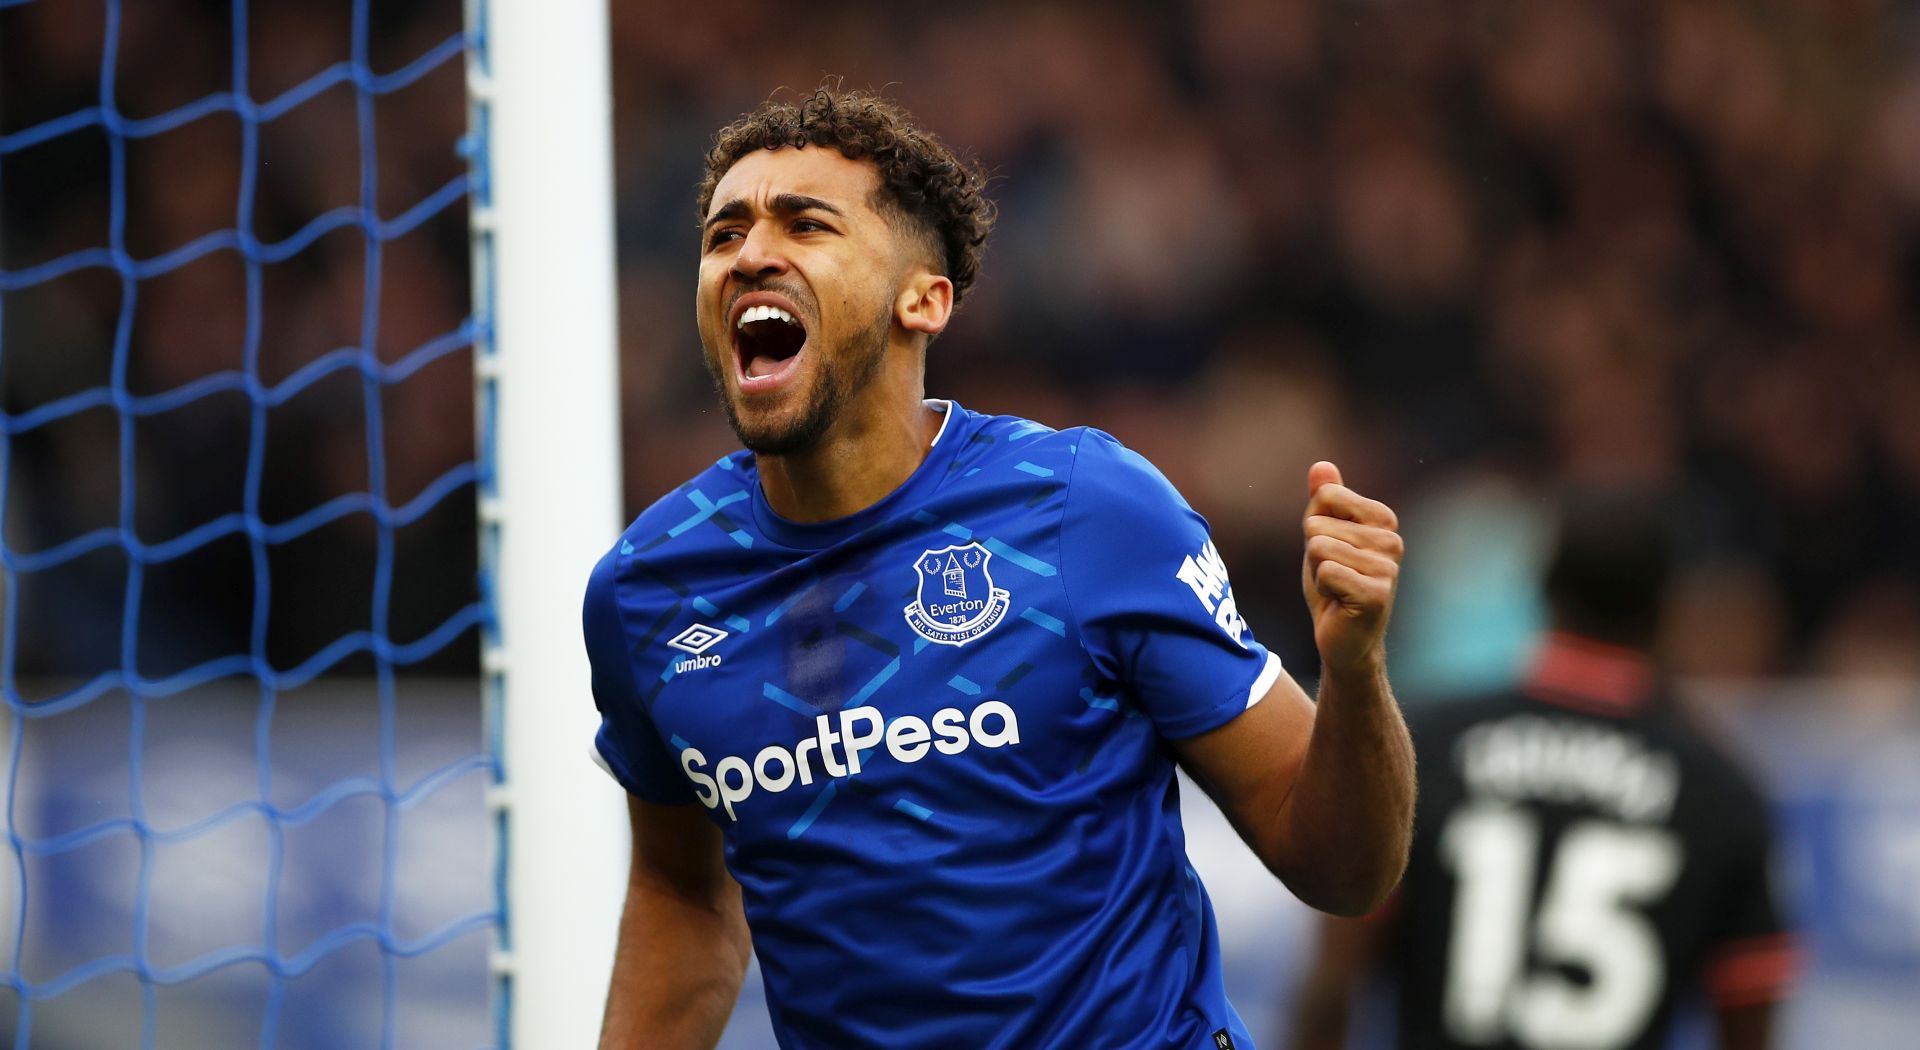 epa08051454 Everton's Dominic Calvert-Lewin celebrates the opening goal during the English Premier league soccer match between Everton and Chelsea FC at Goodison Park in Liverpool, Britain, 07 December 2019.  EPA/LYNNE CAMERON EDITORIAL USE ONLY. No use with unauthorized audio, video, data, fixture lists, club/league logos or 'live' services. Online in-match use limited to 120 images, no video emulation. No use in betting, games or single club/league/player publications